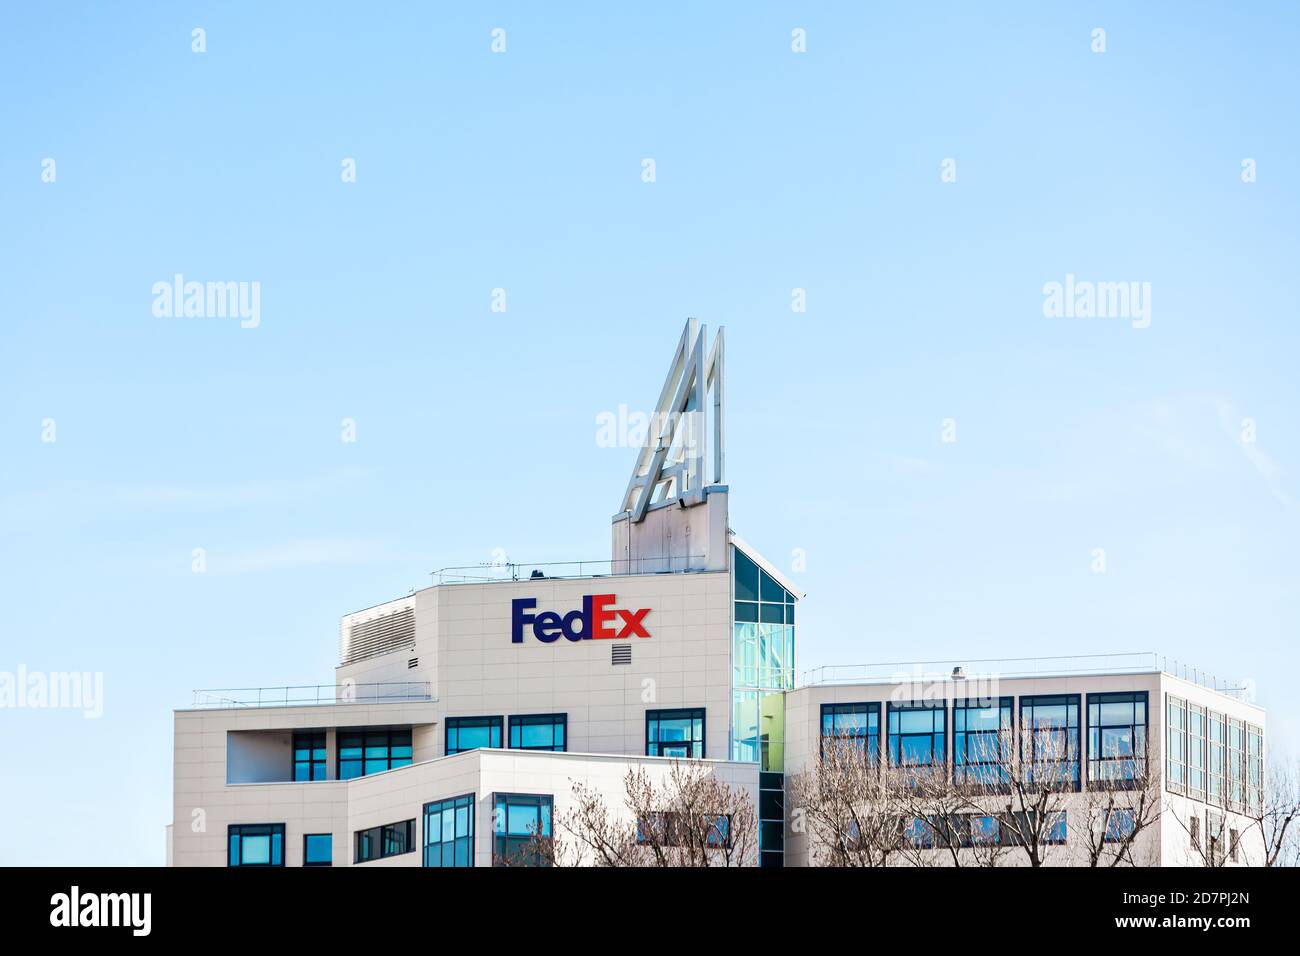 FedEx Corporation, American multinational delivery services company, brand logo on its office building located in Lyon, France - February 23, 2020 Stock Photo